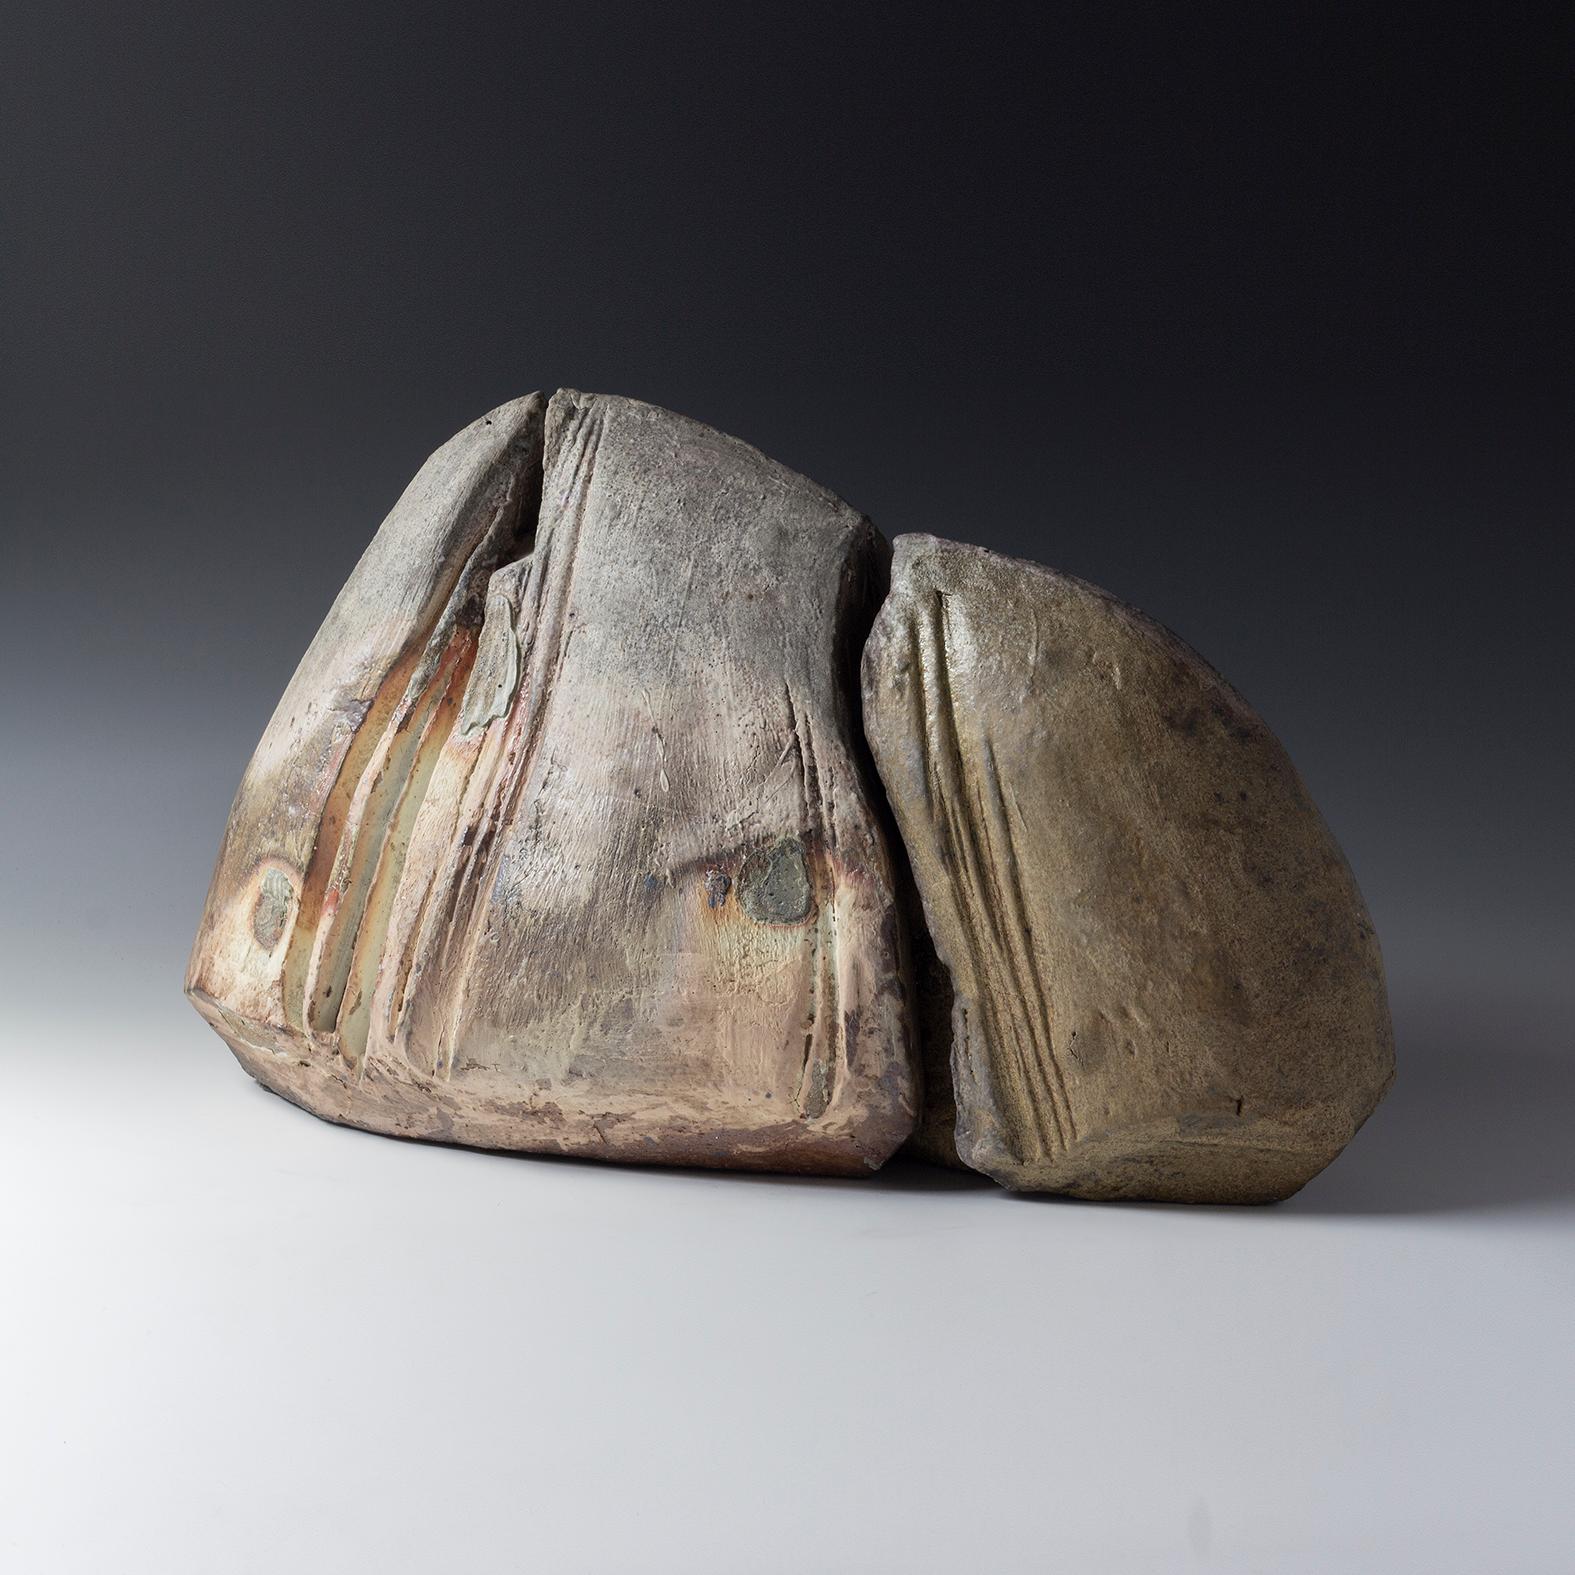 Eric Astoul is a renowned French artist established in La Borne, France. His wood-fired stoneware sculptures are rich in this tension between interior and exterior, an internal surge which seems to be able to shatter the work, its erected walls,